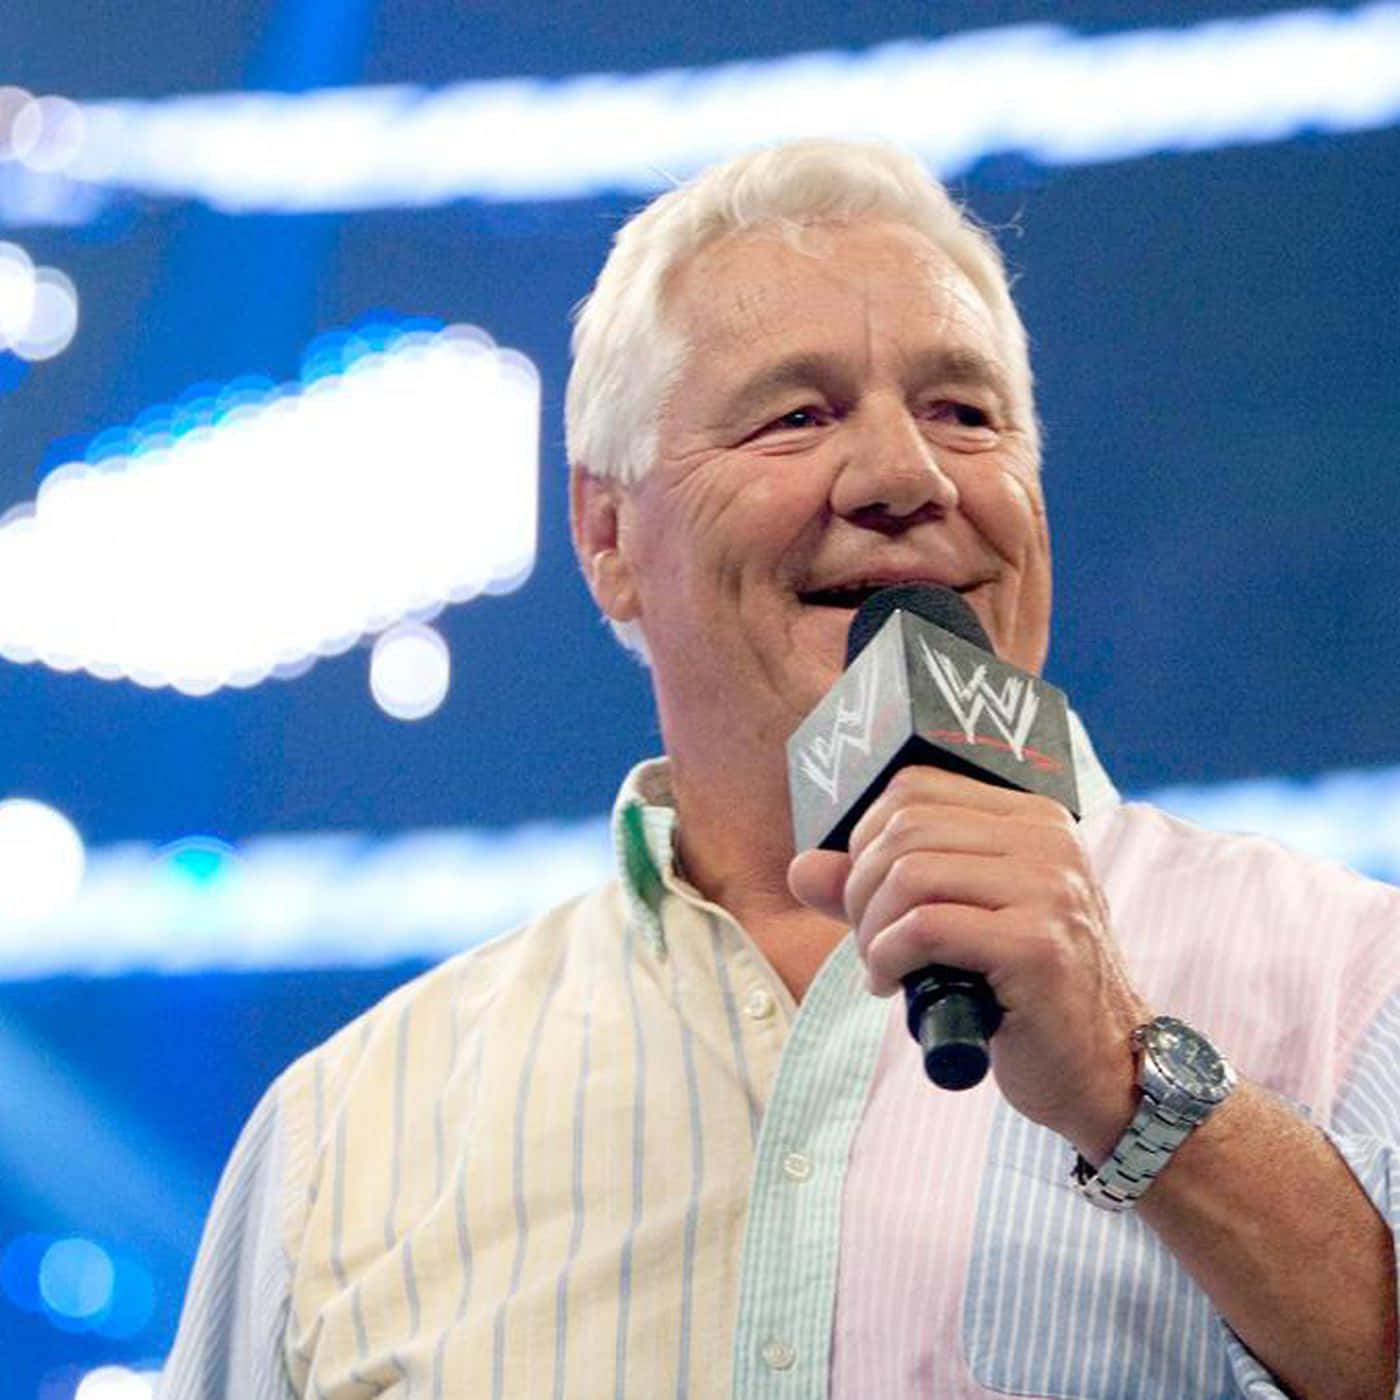 Pat Patterson Introductory Speech At WWE Stage Wallpaper